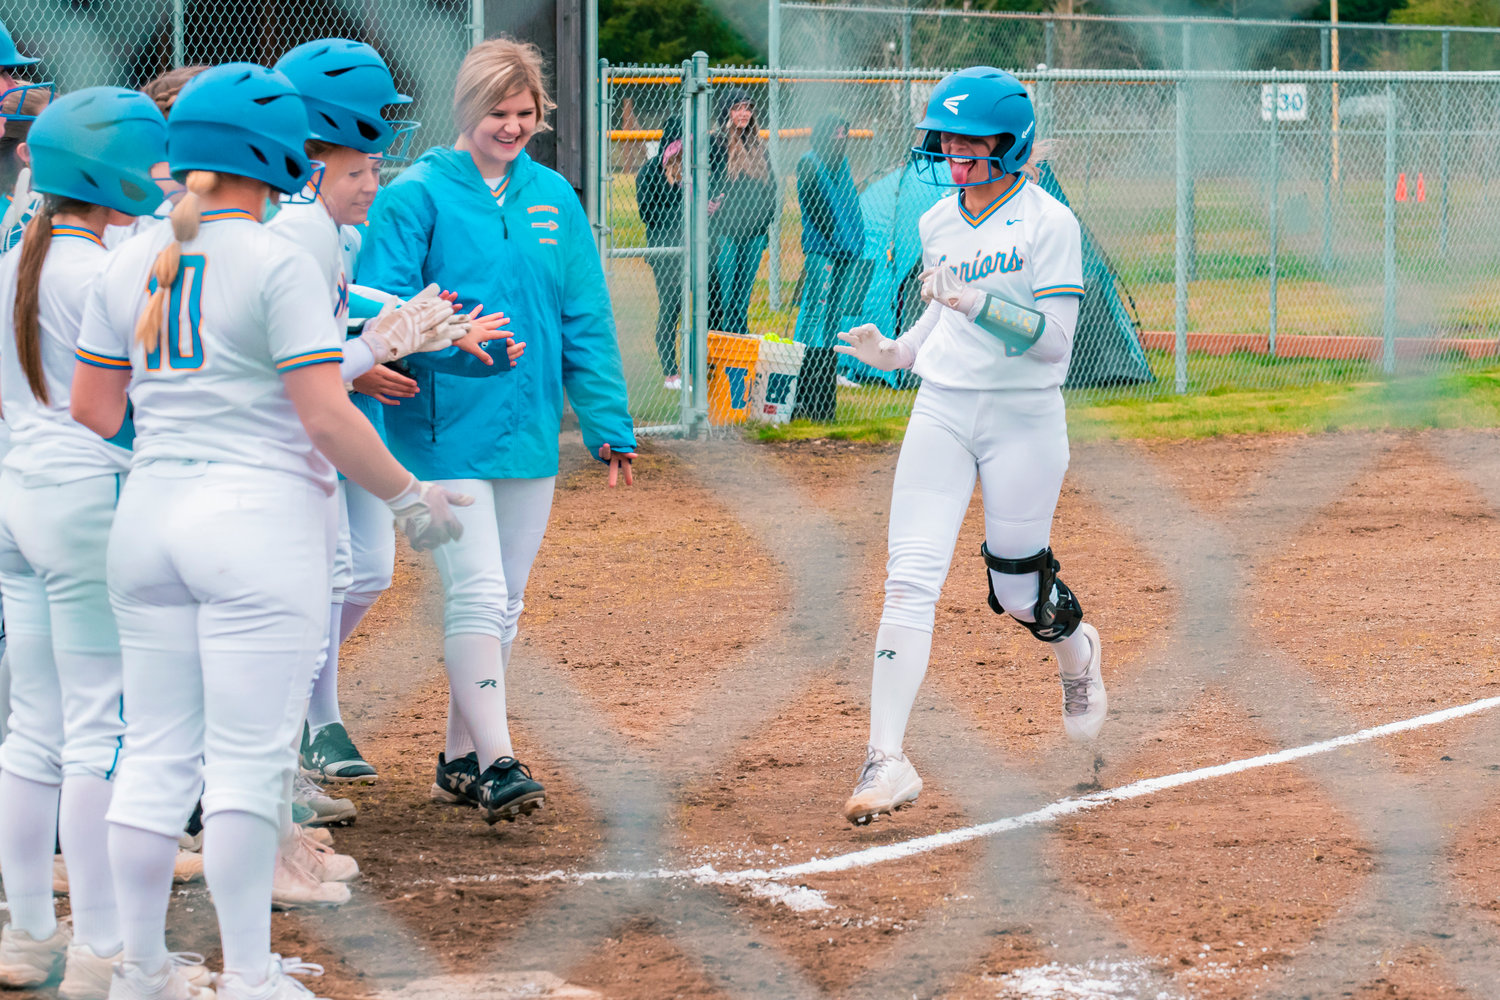 Rochester’s Sadie Knutson is met at home plate by teammates after hitting a home run Wednesday during a game against Centralia.